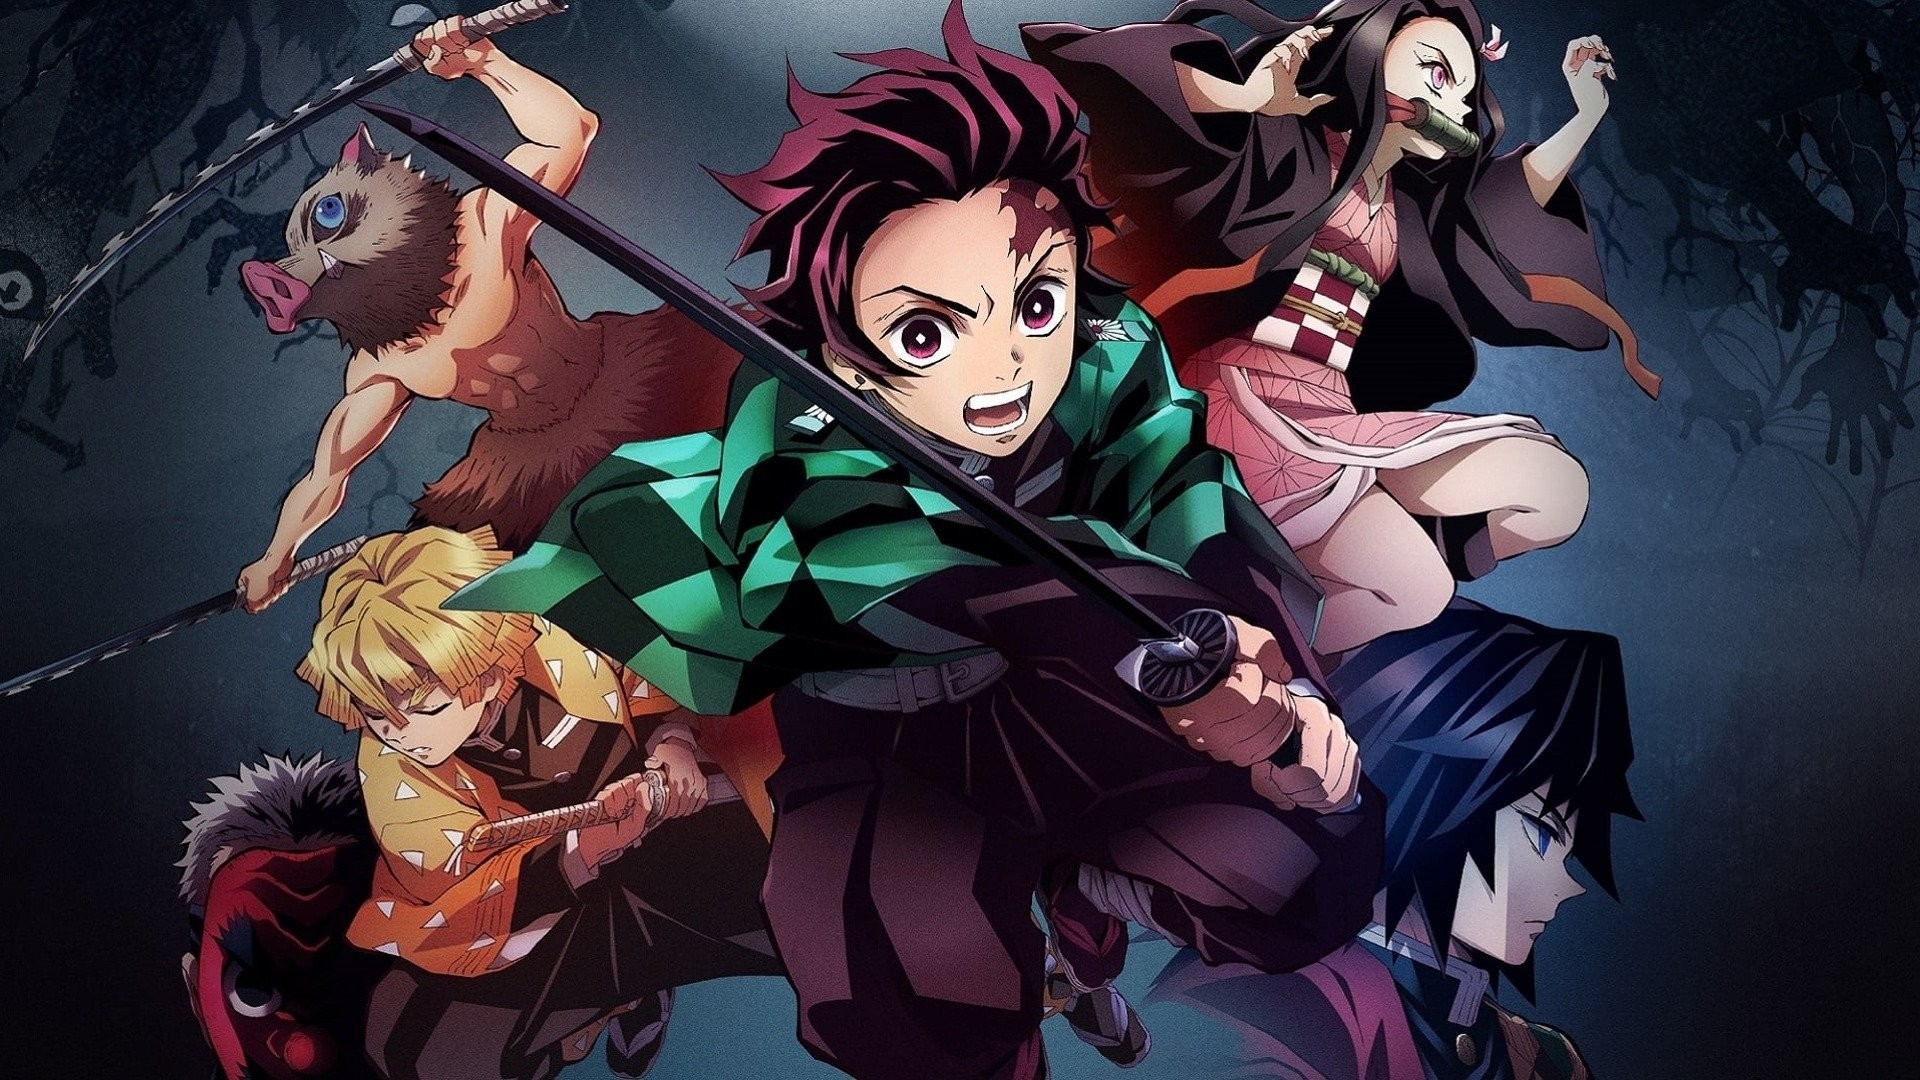 Demon Slayer: Kimetsu no Yaiba -- Mugen Train Arc (Remade as TV series) and  Entertainment District Arc are respectively coming on October 10th and  December 5th, 2021 : r/TwoBestFriendsPlay